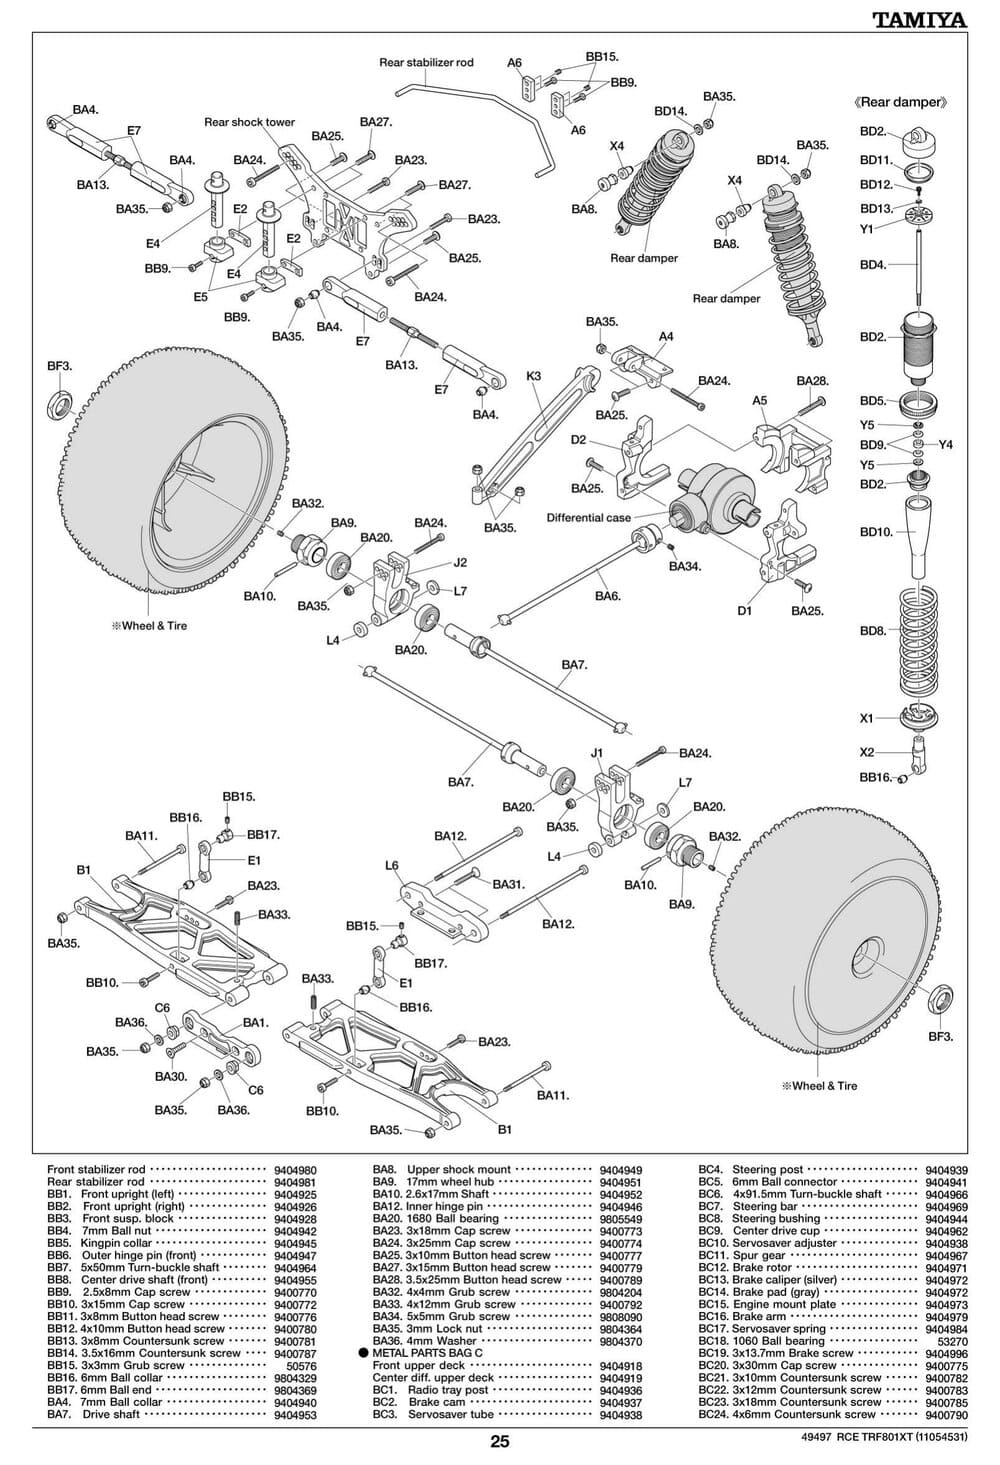 Tamiya - TRF801Xt Performance Package Version Chassis - Manual - Page 25